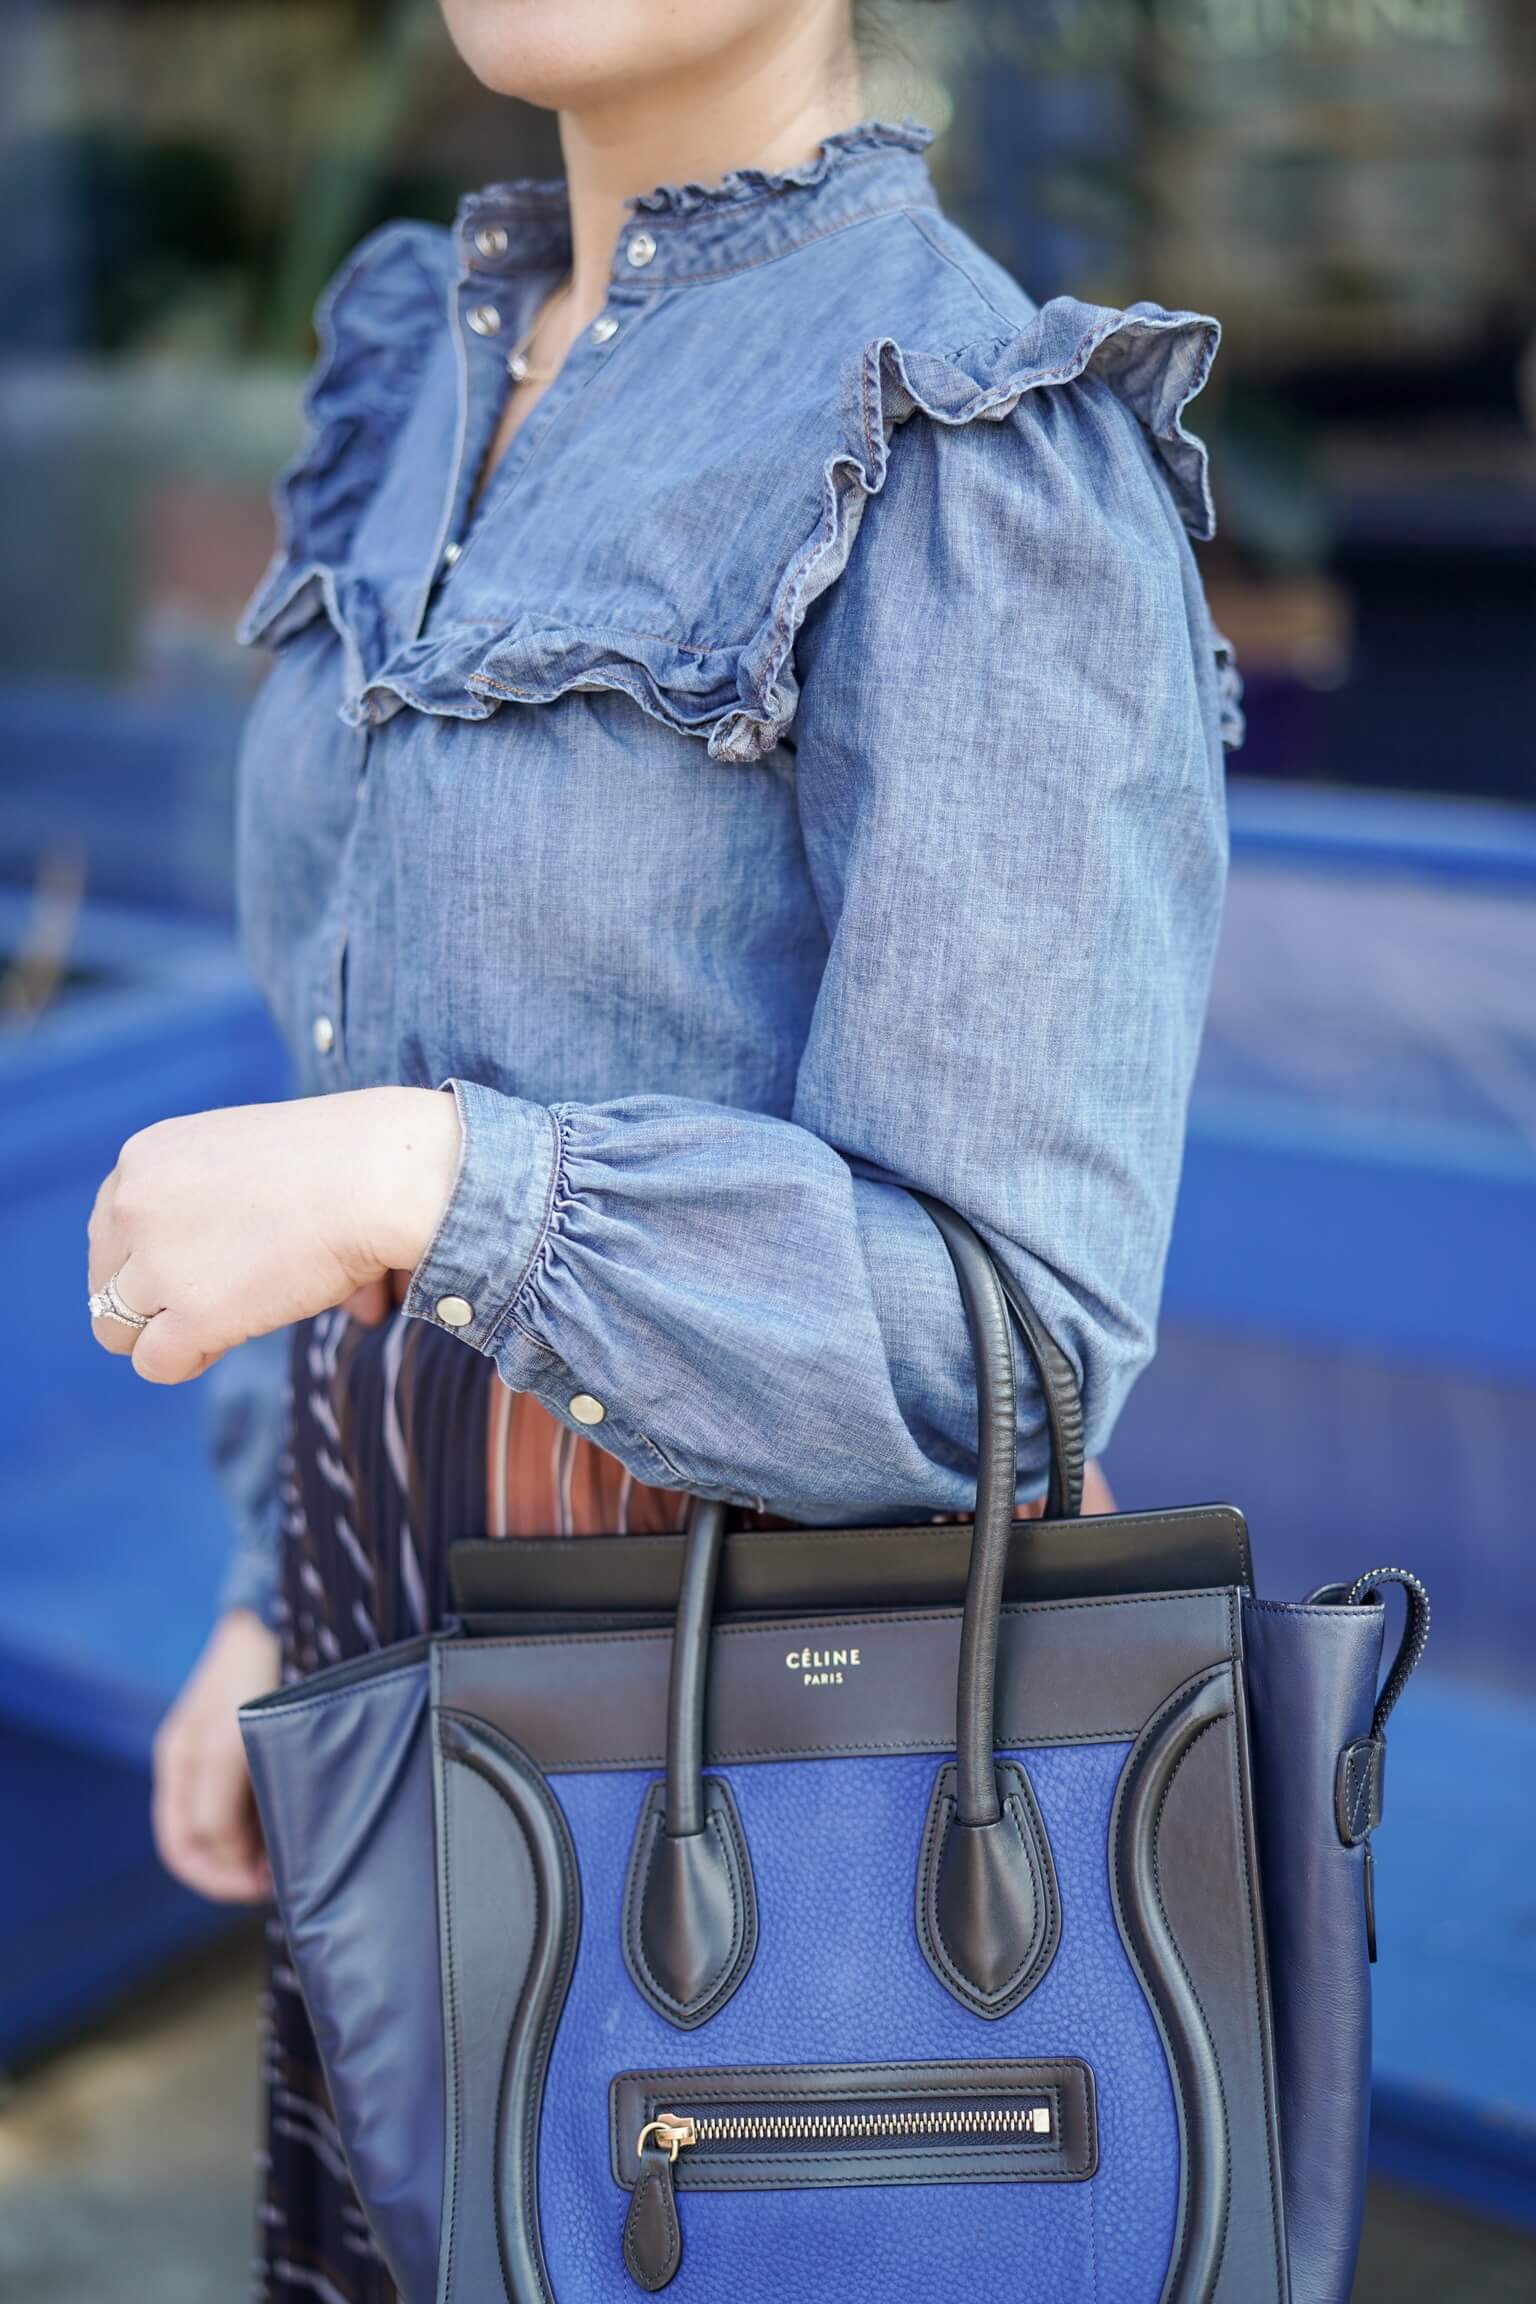 Anthropologie Pleated Skirt Veronica Beard Denim Shirt Coclico Booties Celine Luggage Bag Outfit by Modnitsa Styling